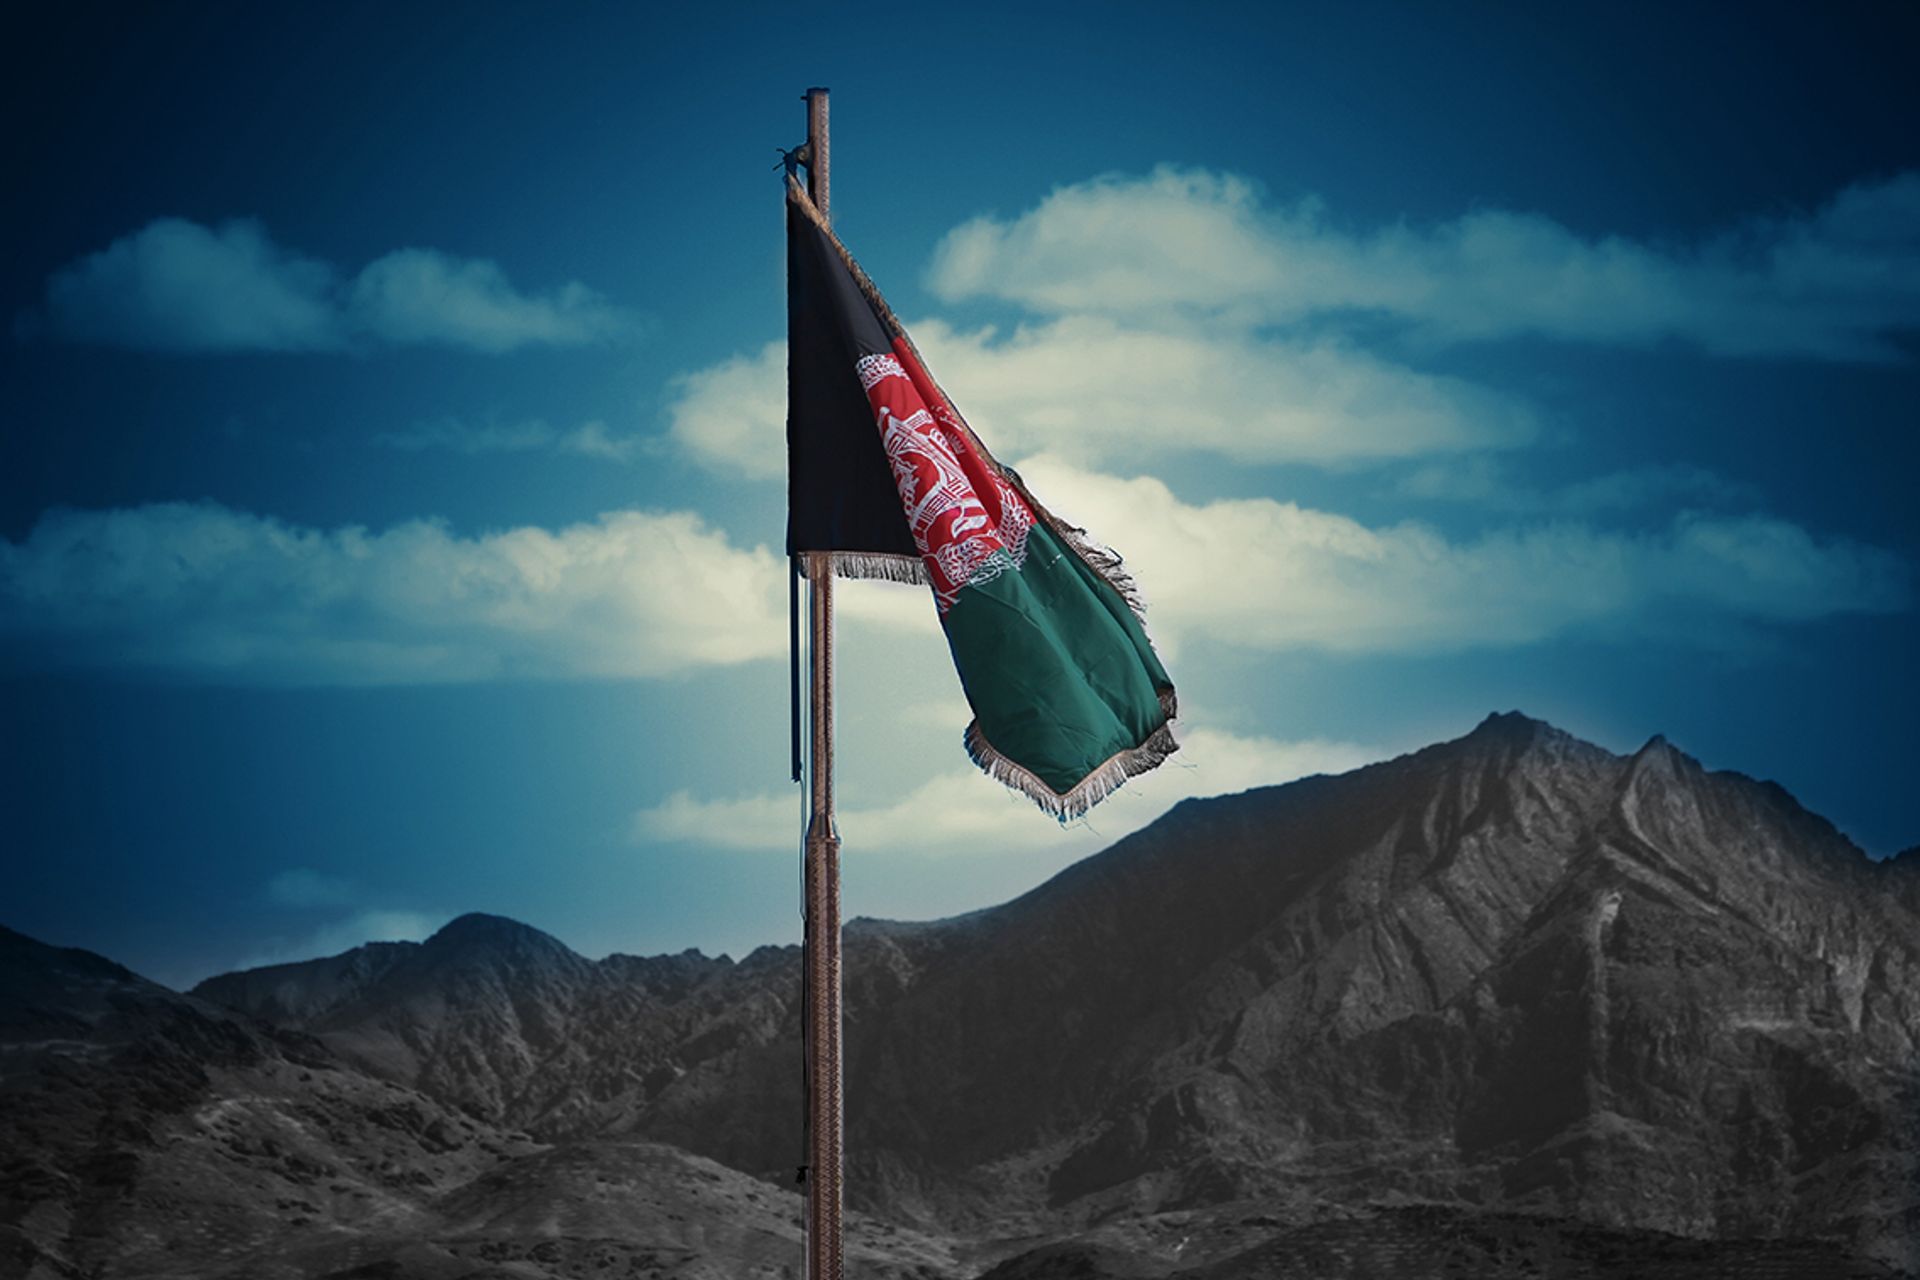 The new measure introduced on 18 February follows the Taliban's takeover of Afghanistan last year © Farid Ershad